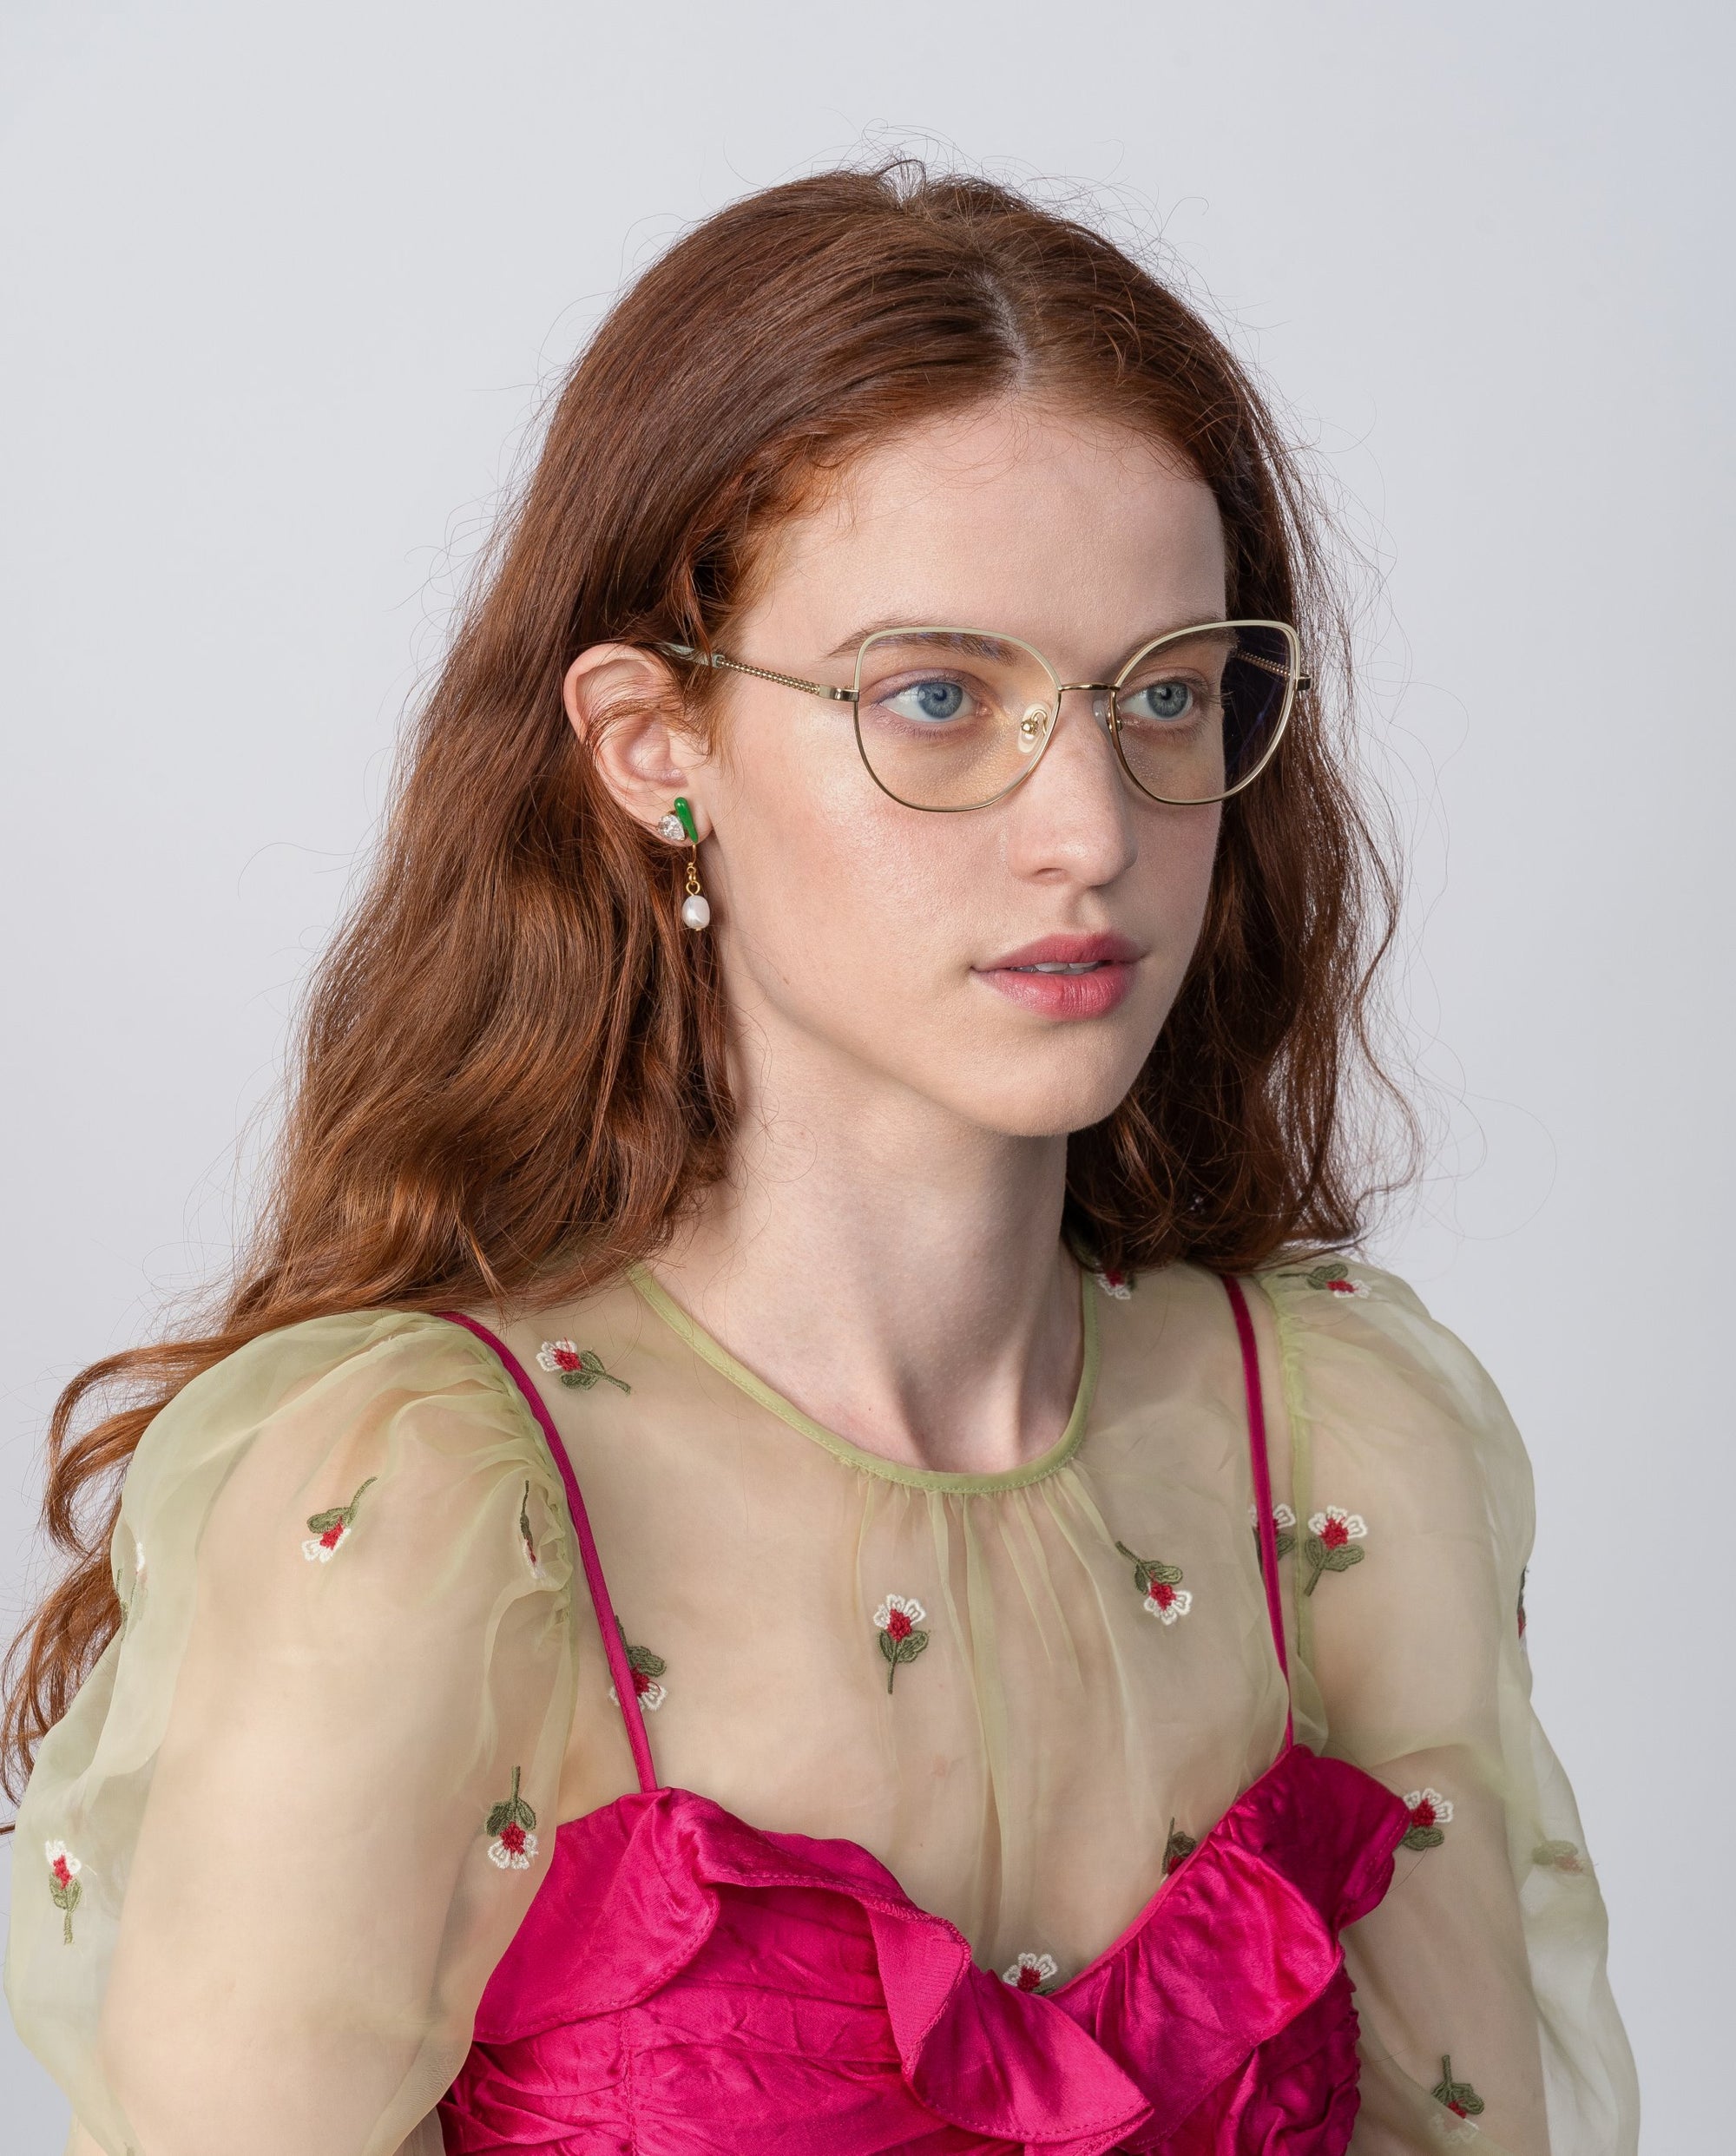 A woman with long, wavy auburn hair and wearing Ophelia glasses by For Art&#39;s Sake® is looking slightly to the side. She is dressed in a sheer, green, floral-embroidered top over a bright pink, ruffled dress. The background is plain and light-colored.